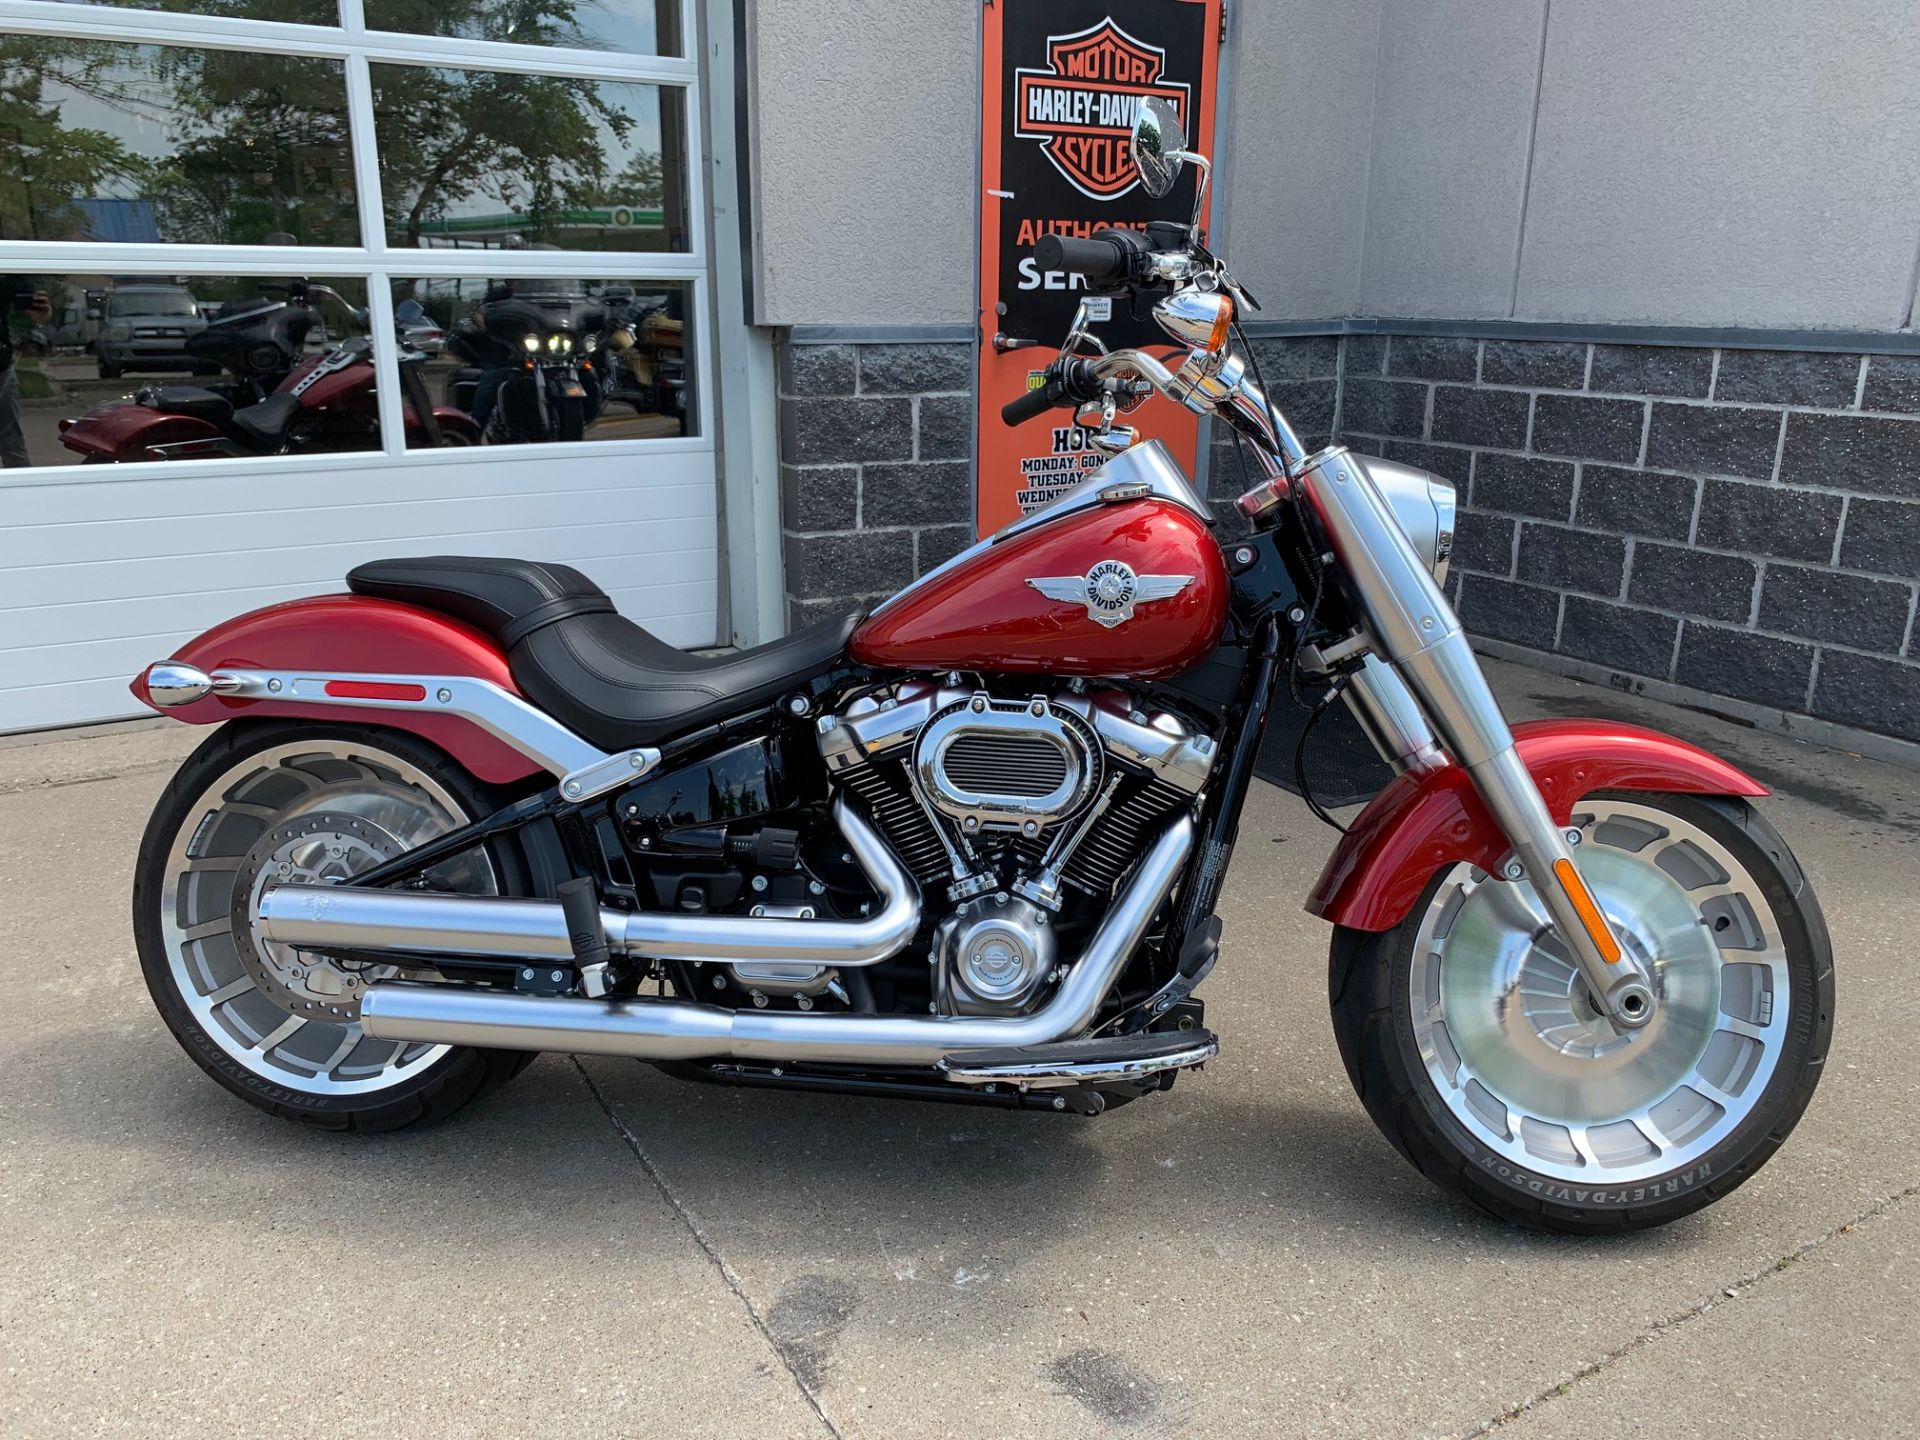 Used 2019 Harley Davidson Fat Boy 107 Wicked Red Motorcycles In Dubuque Ia U034507